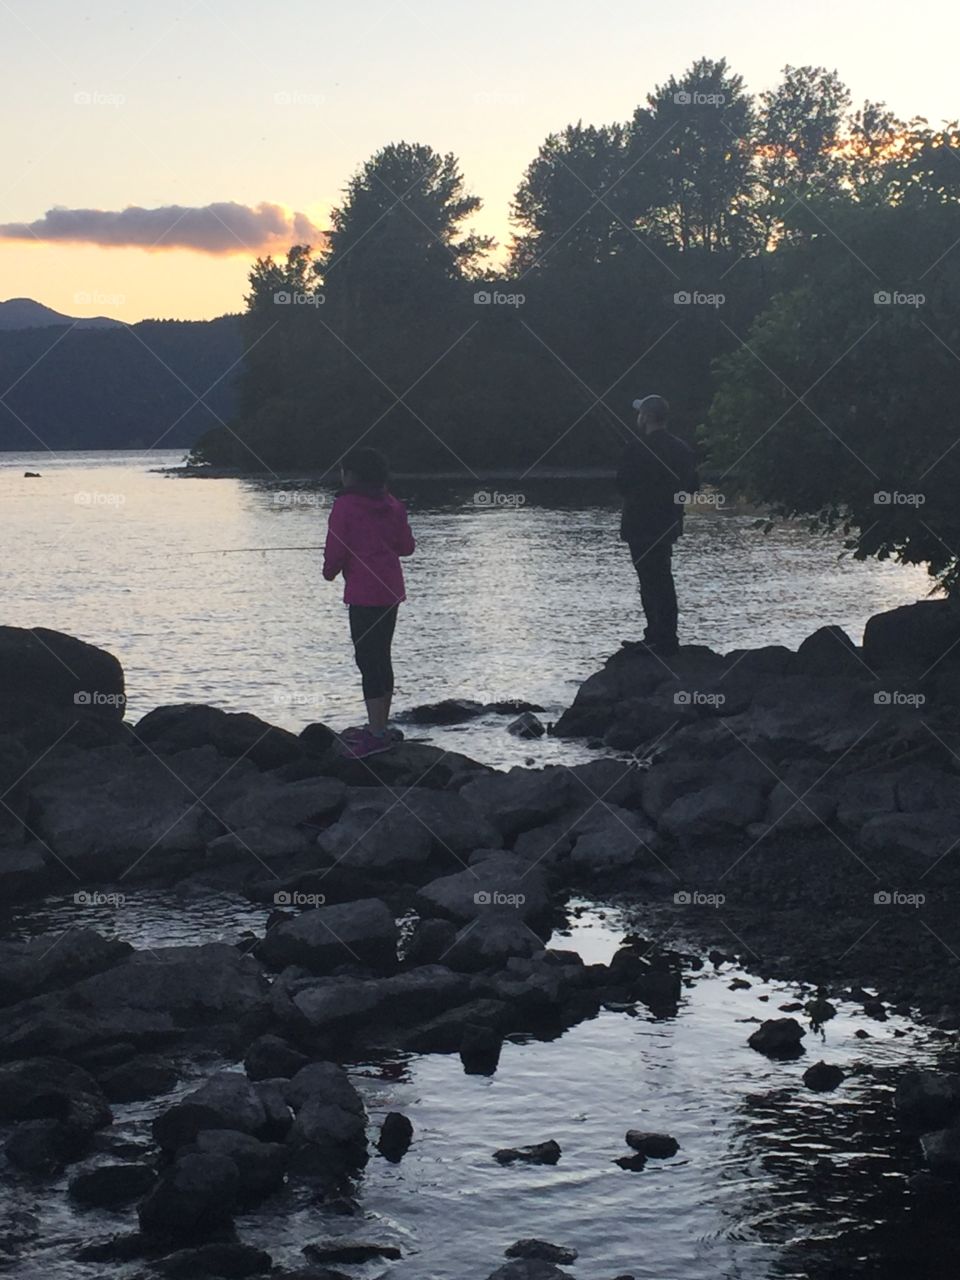 Fishing at sunset in the Columbia River.